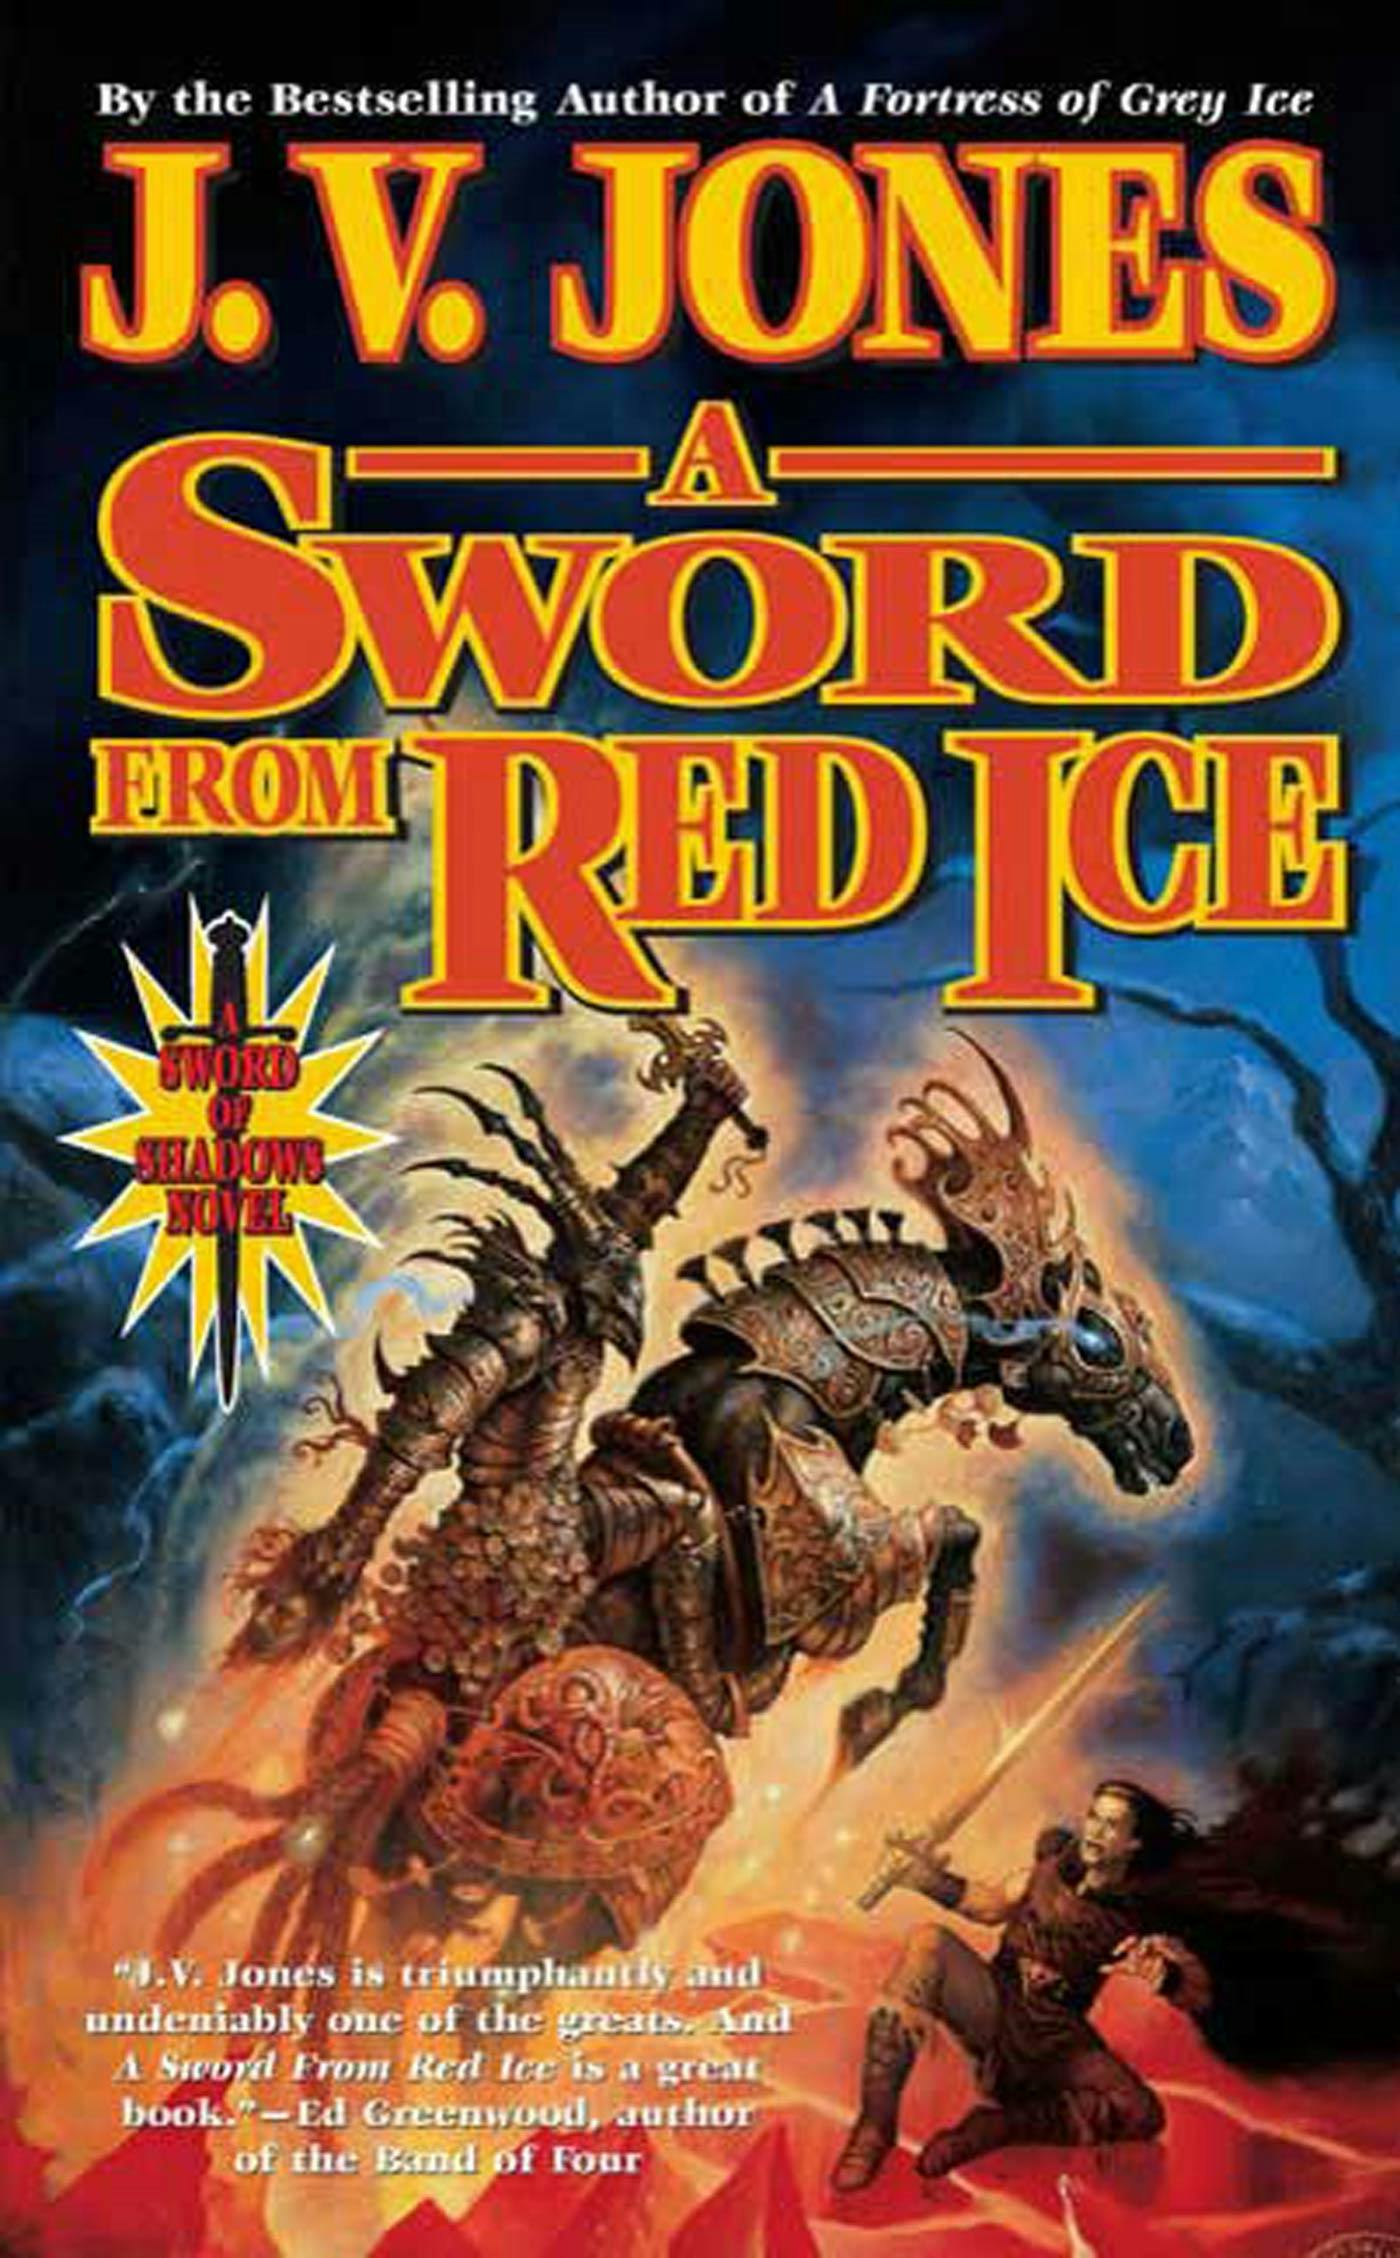 Sword from Red Ice